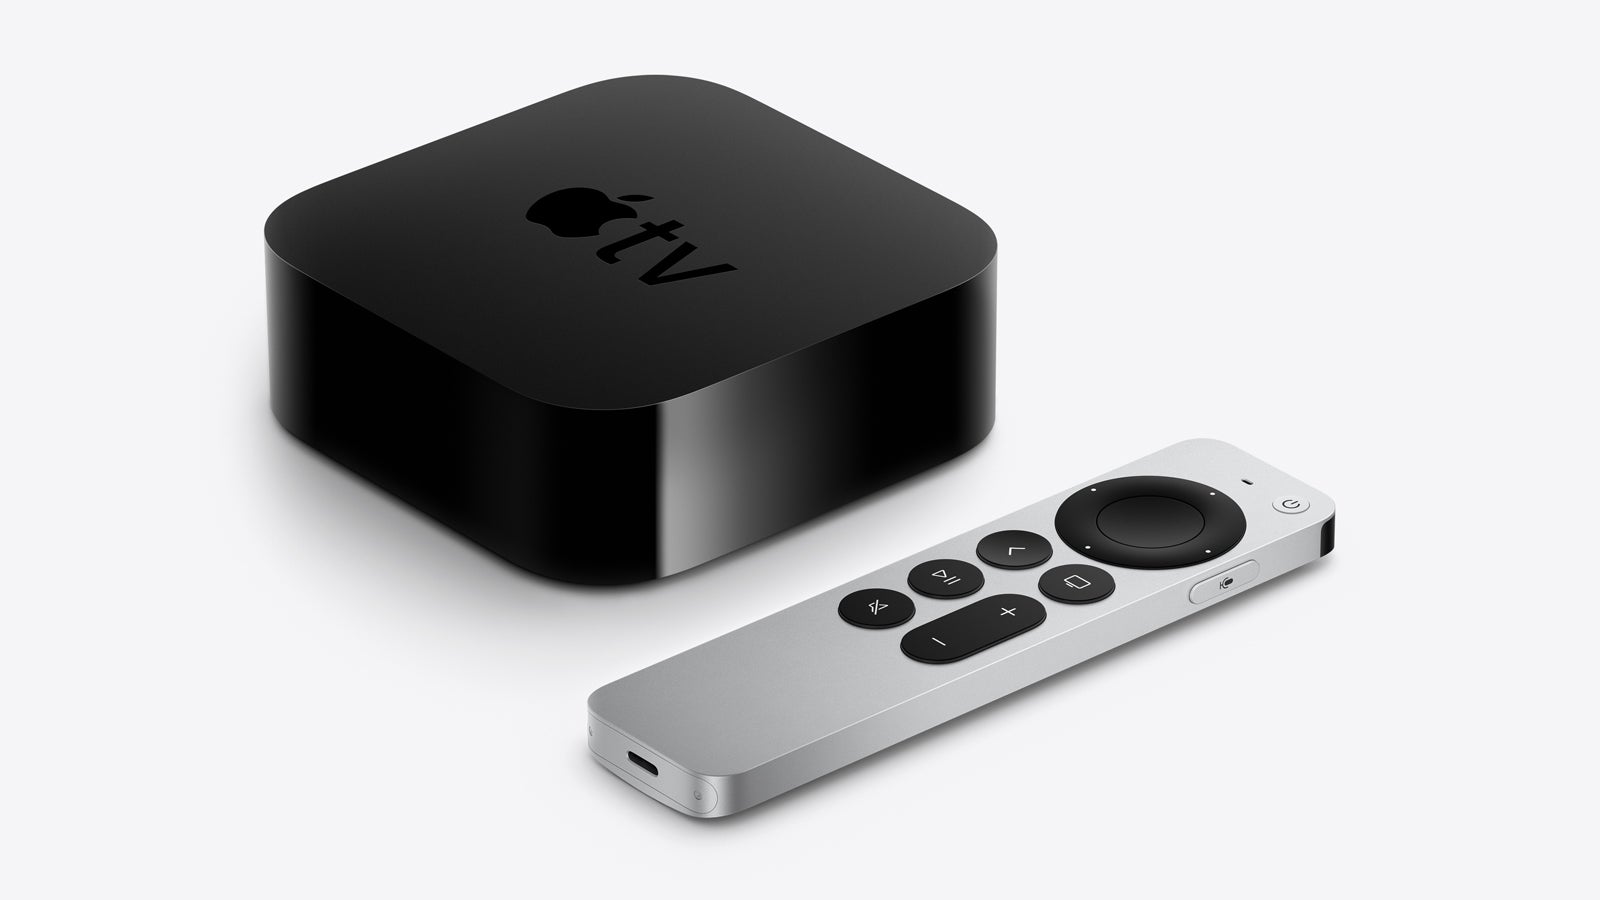 An Apple TV 4K box works well with an iPhone. (Image: Apple)